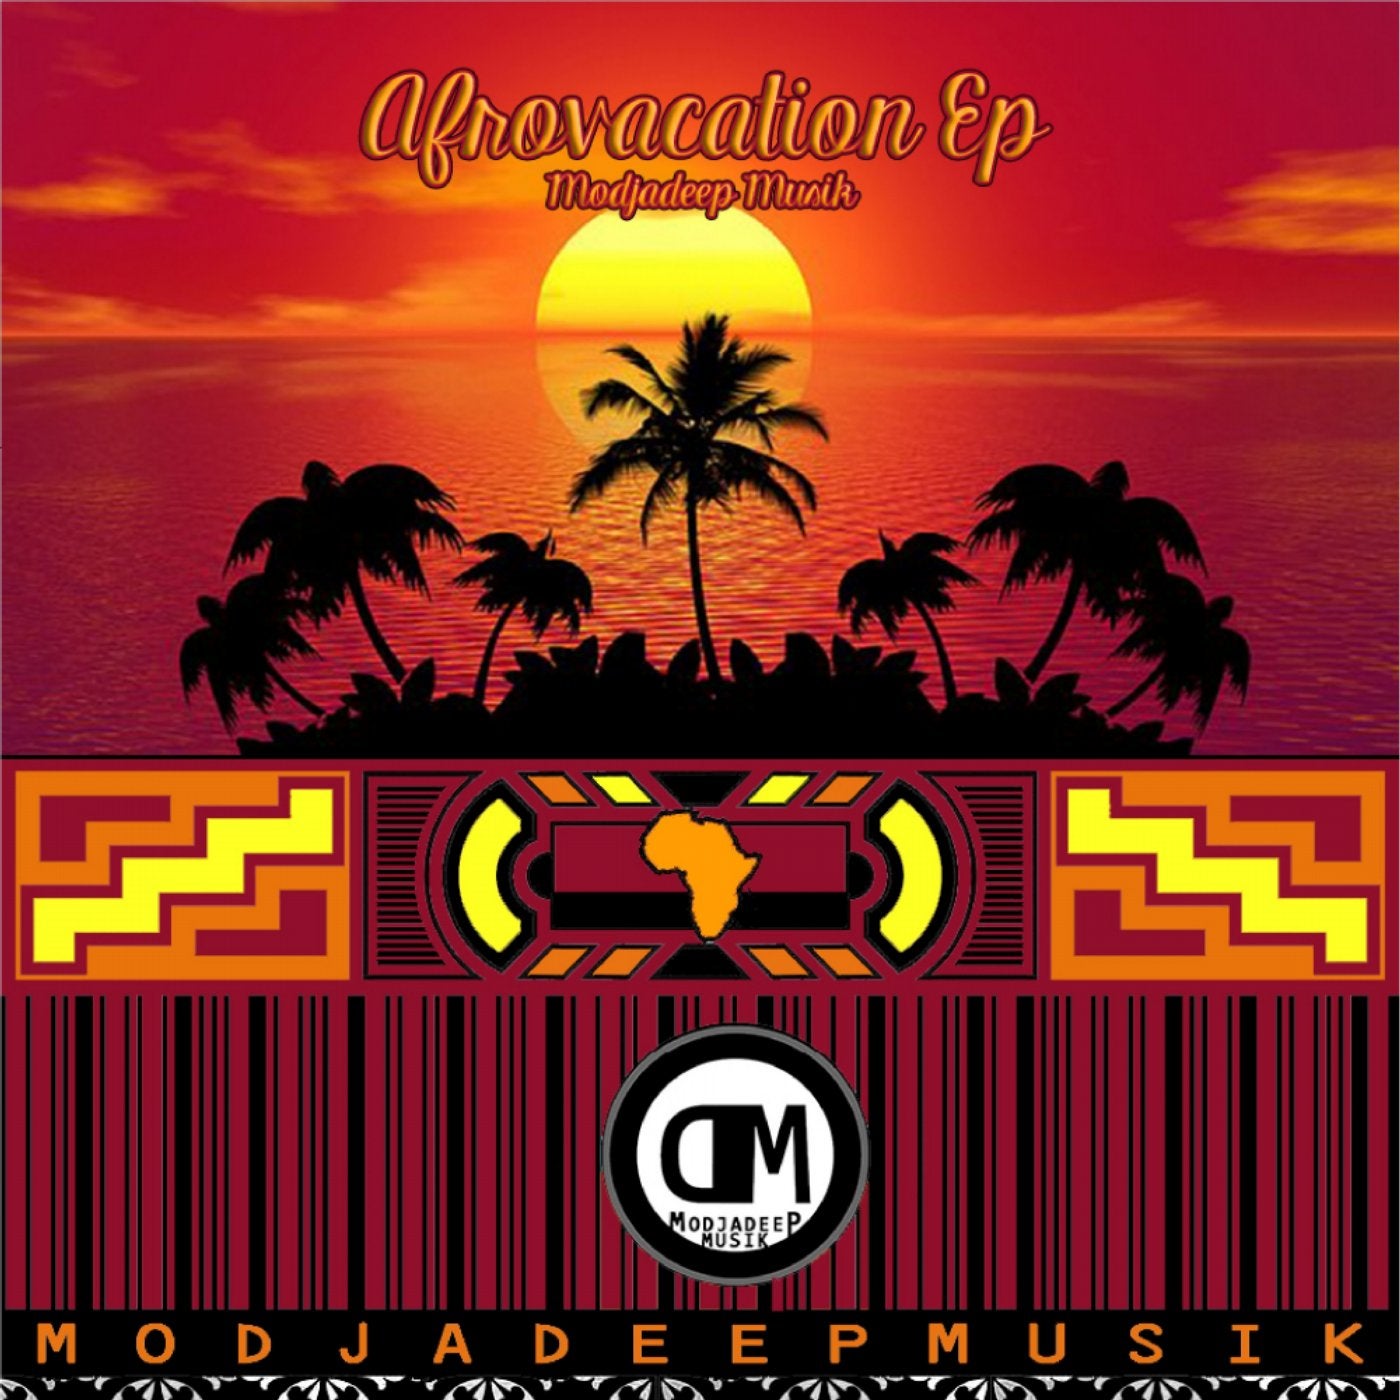 Afrovacation EP